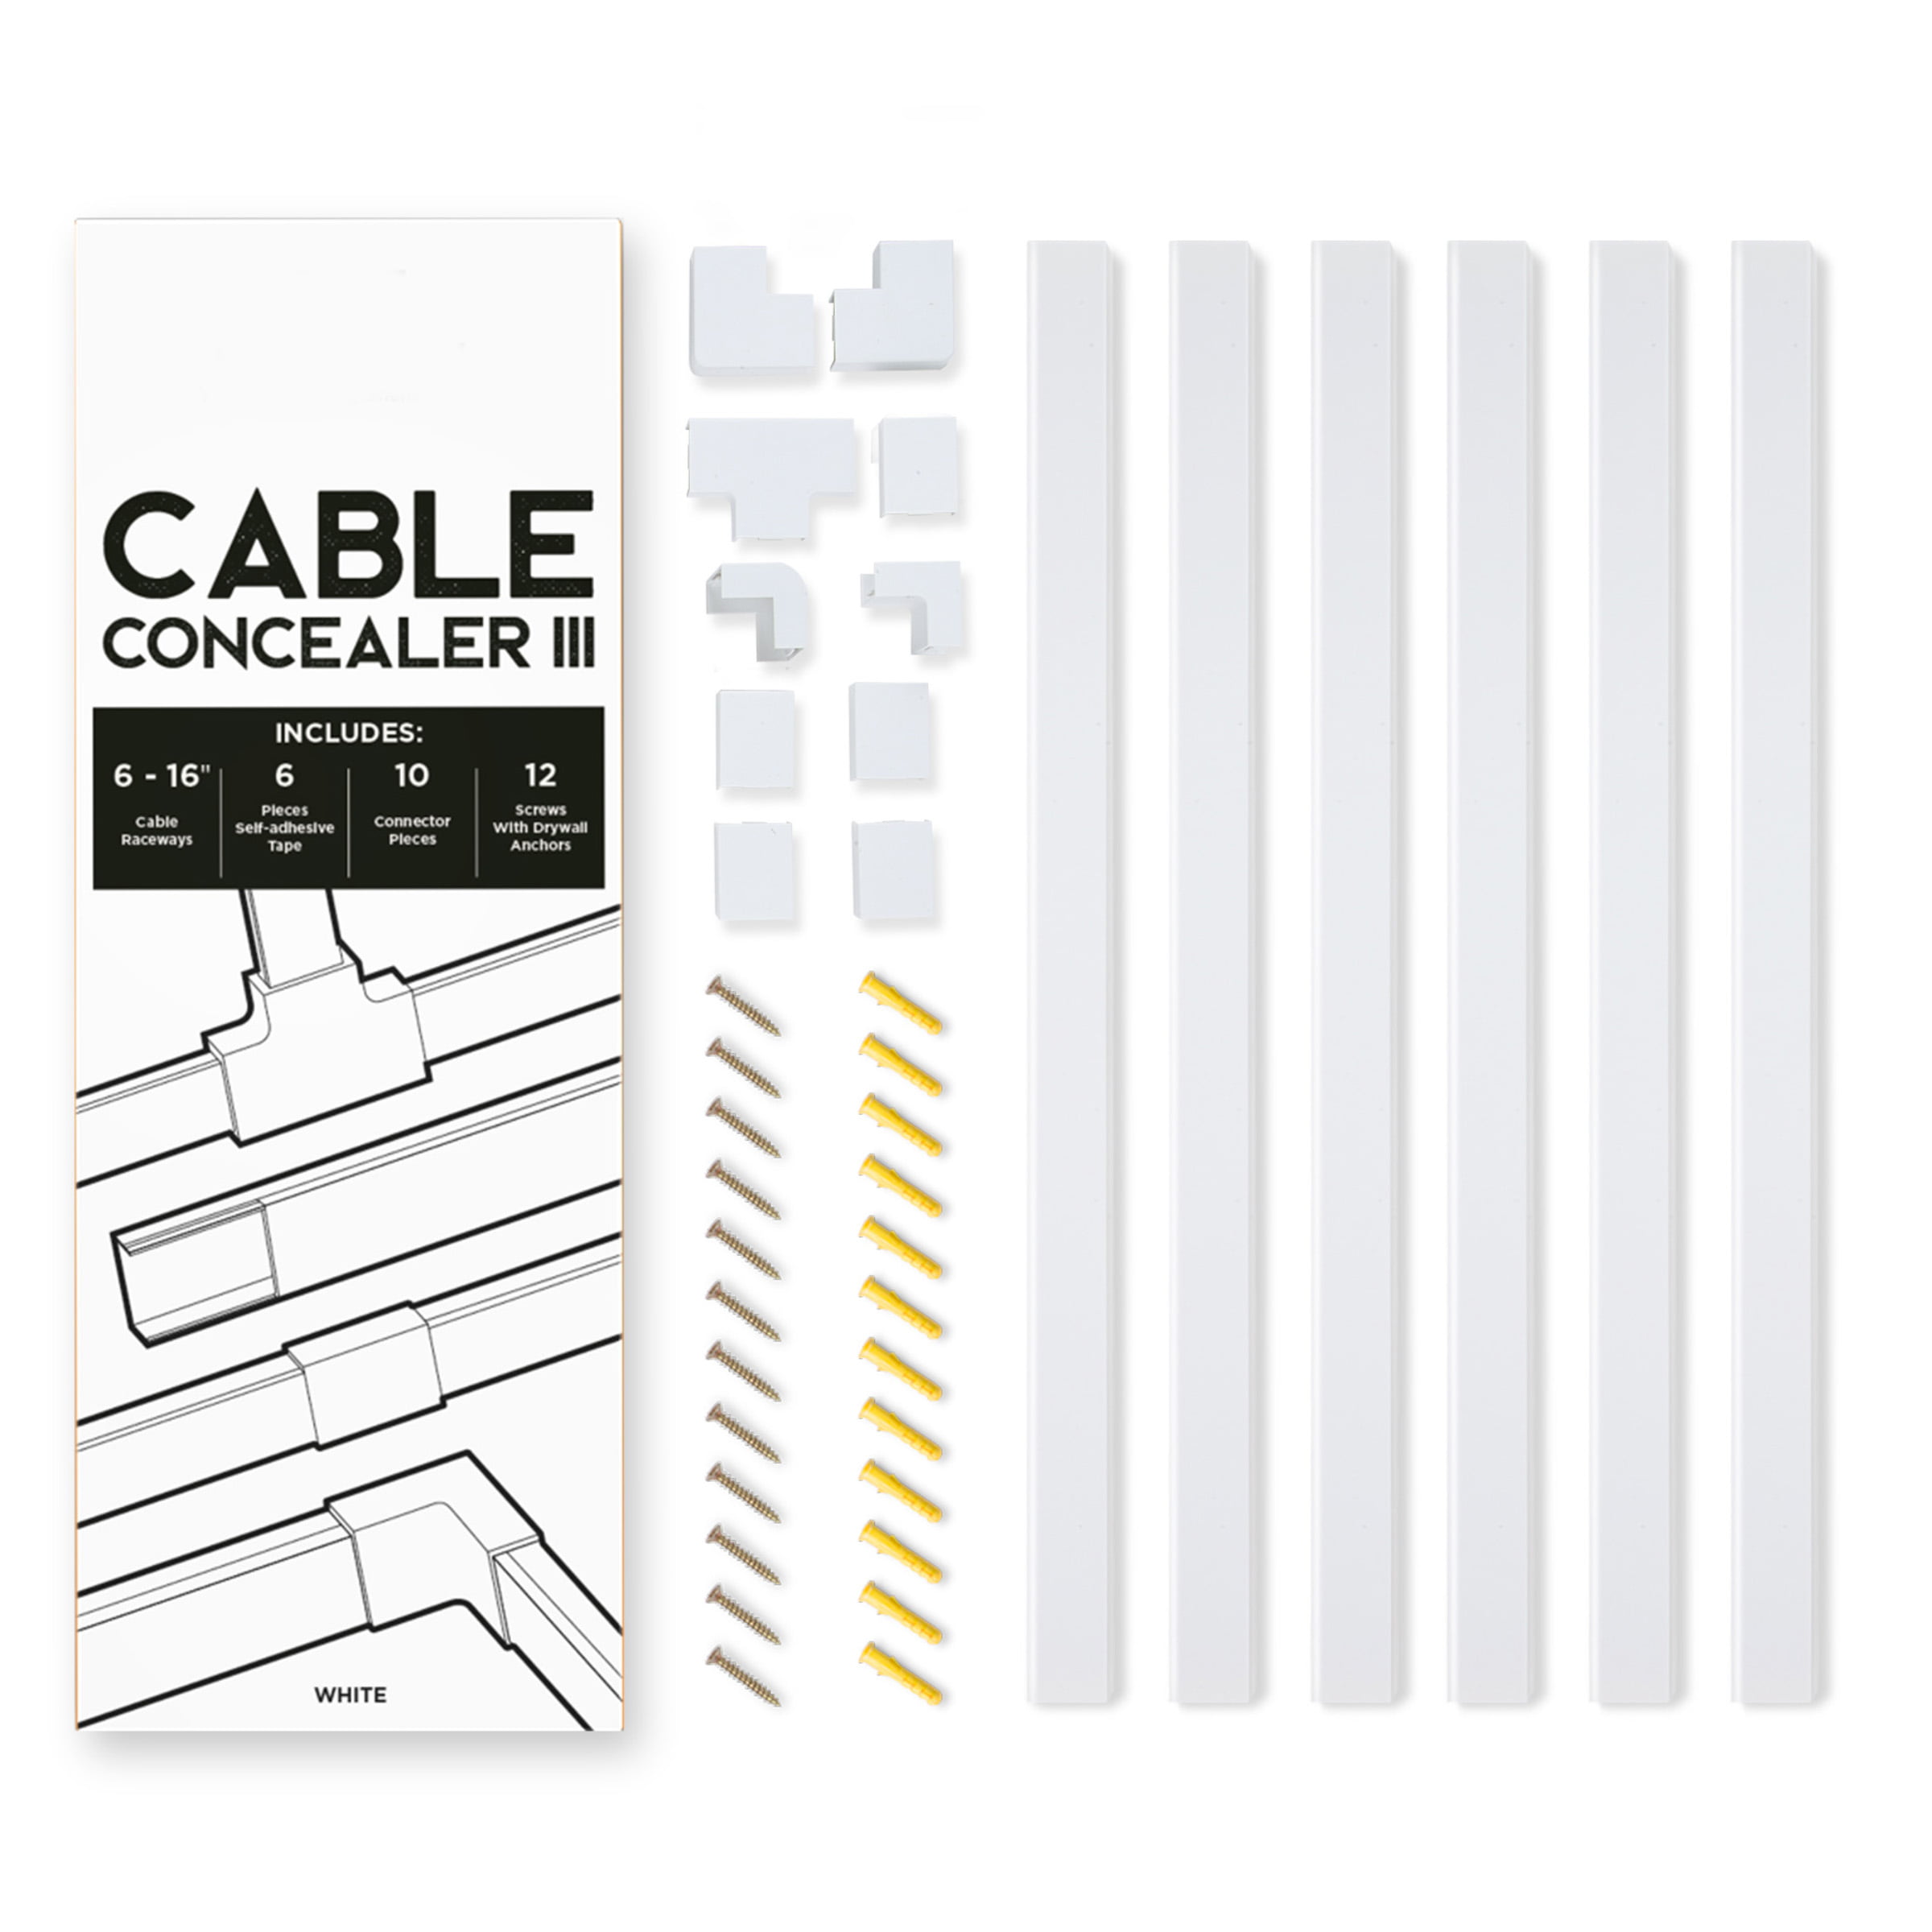 Cable Concealer, Cord Cover Raceway Kit, Wire Cover For Mount TV